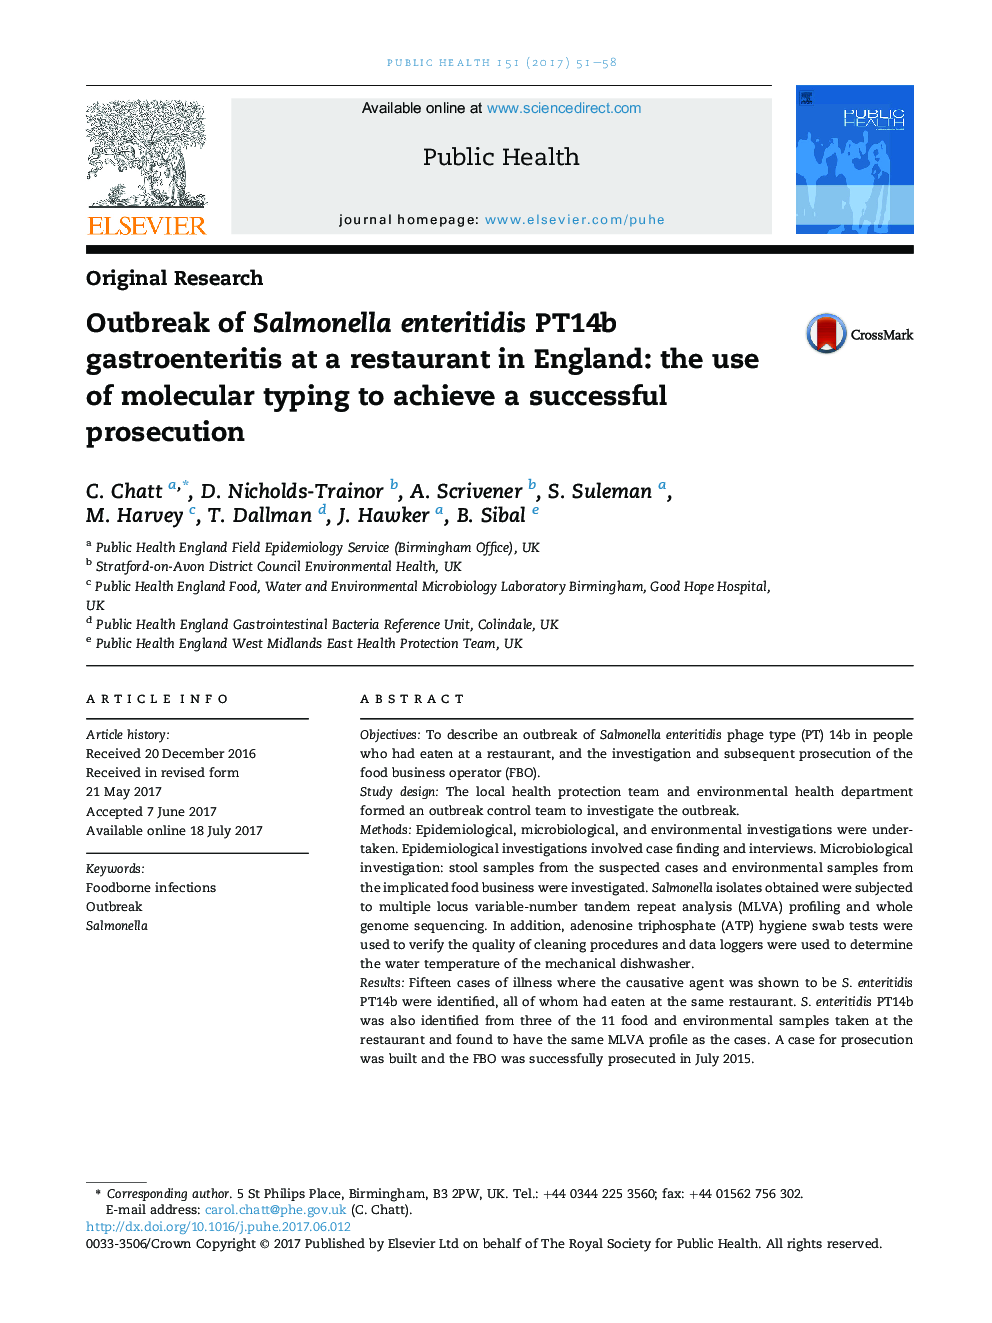 Outbreak of Salmonella enteritidis PT14b gastroenteritis at a restaurant in England: the use of molecular typing to achieve a successful prosecution